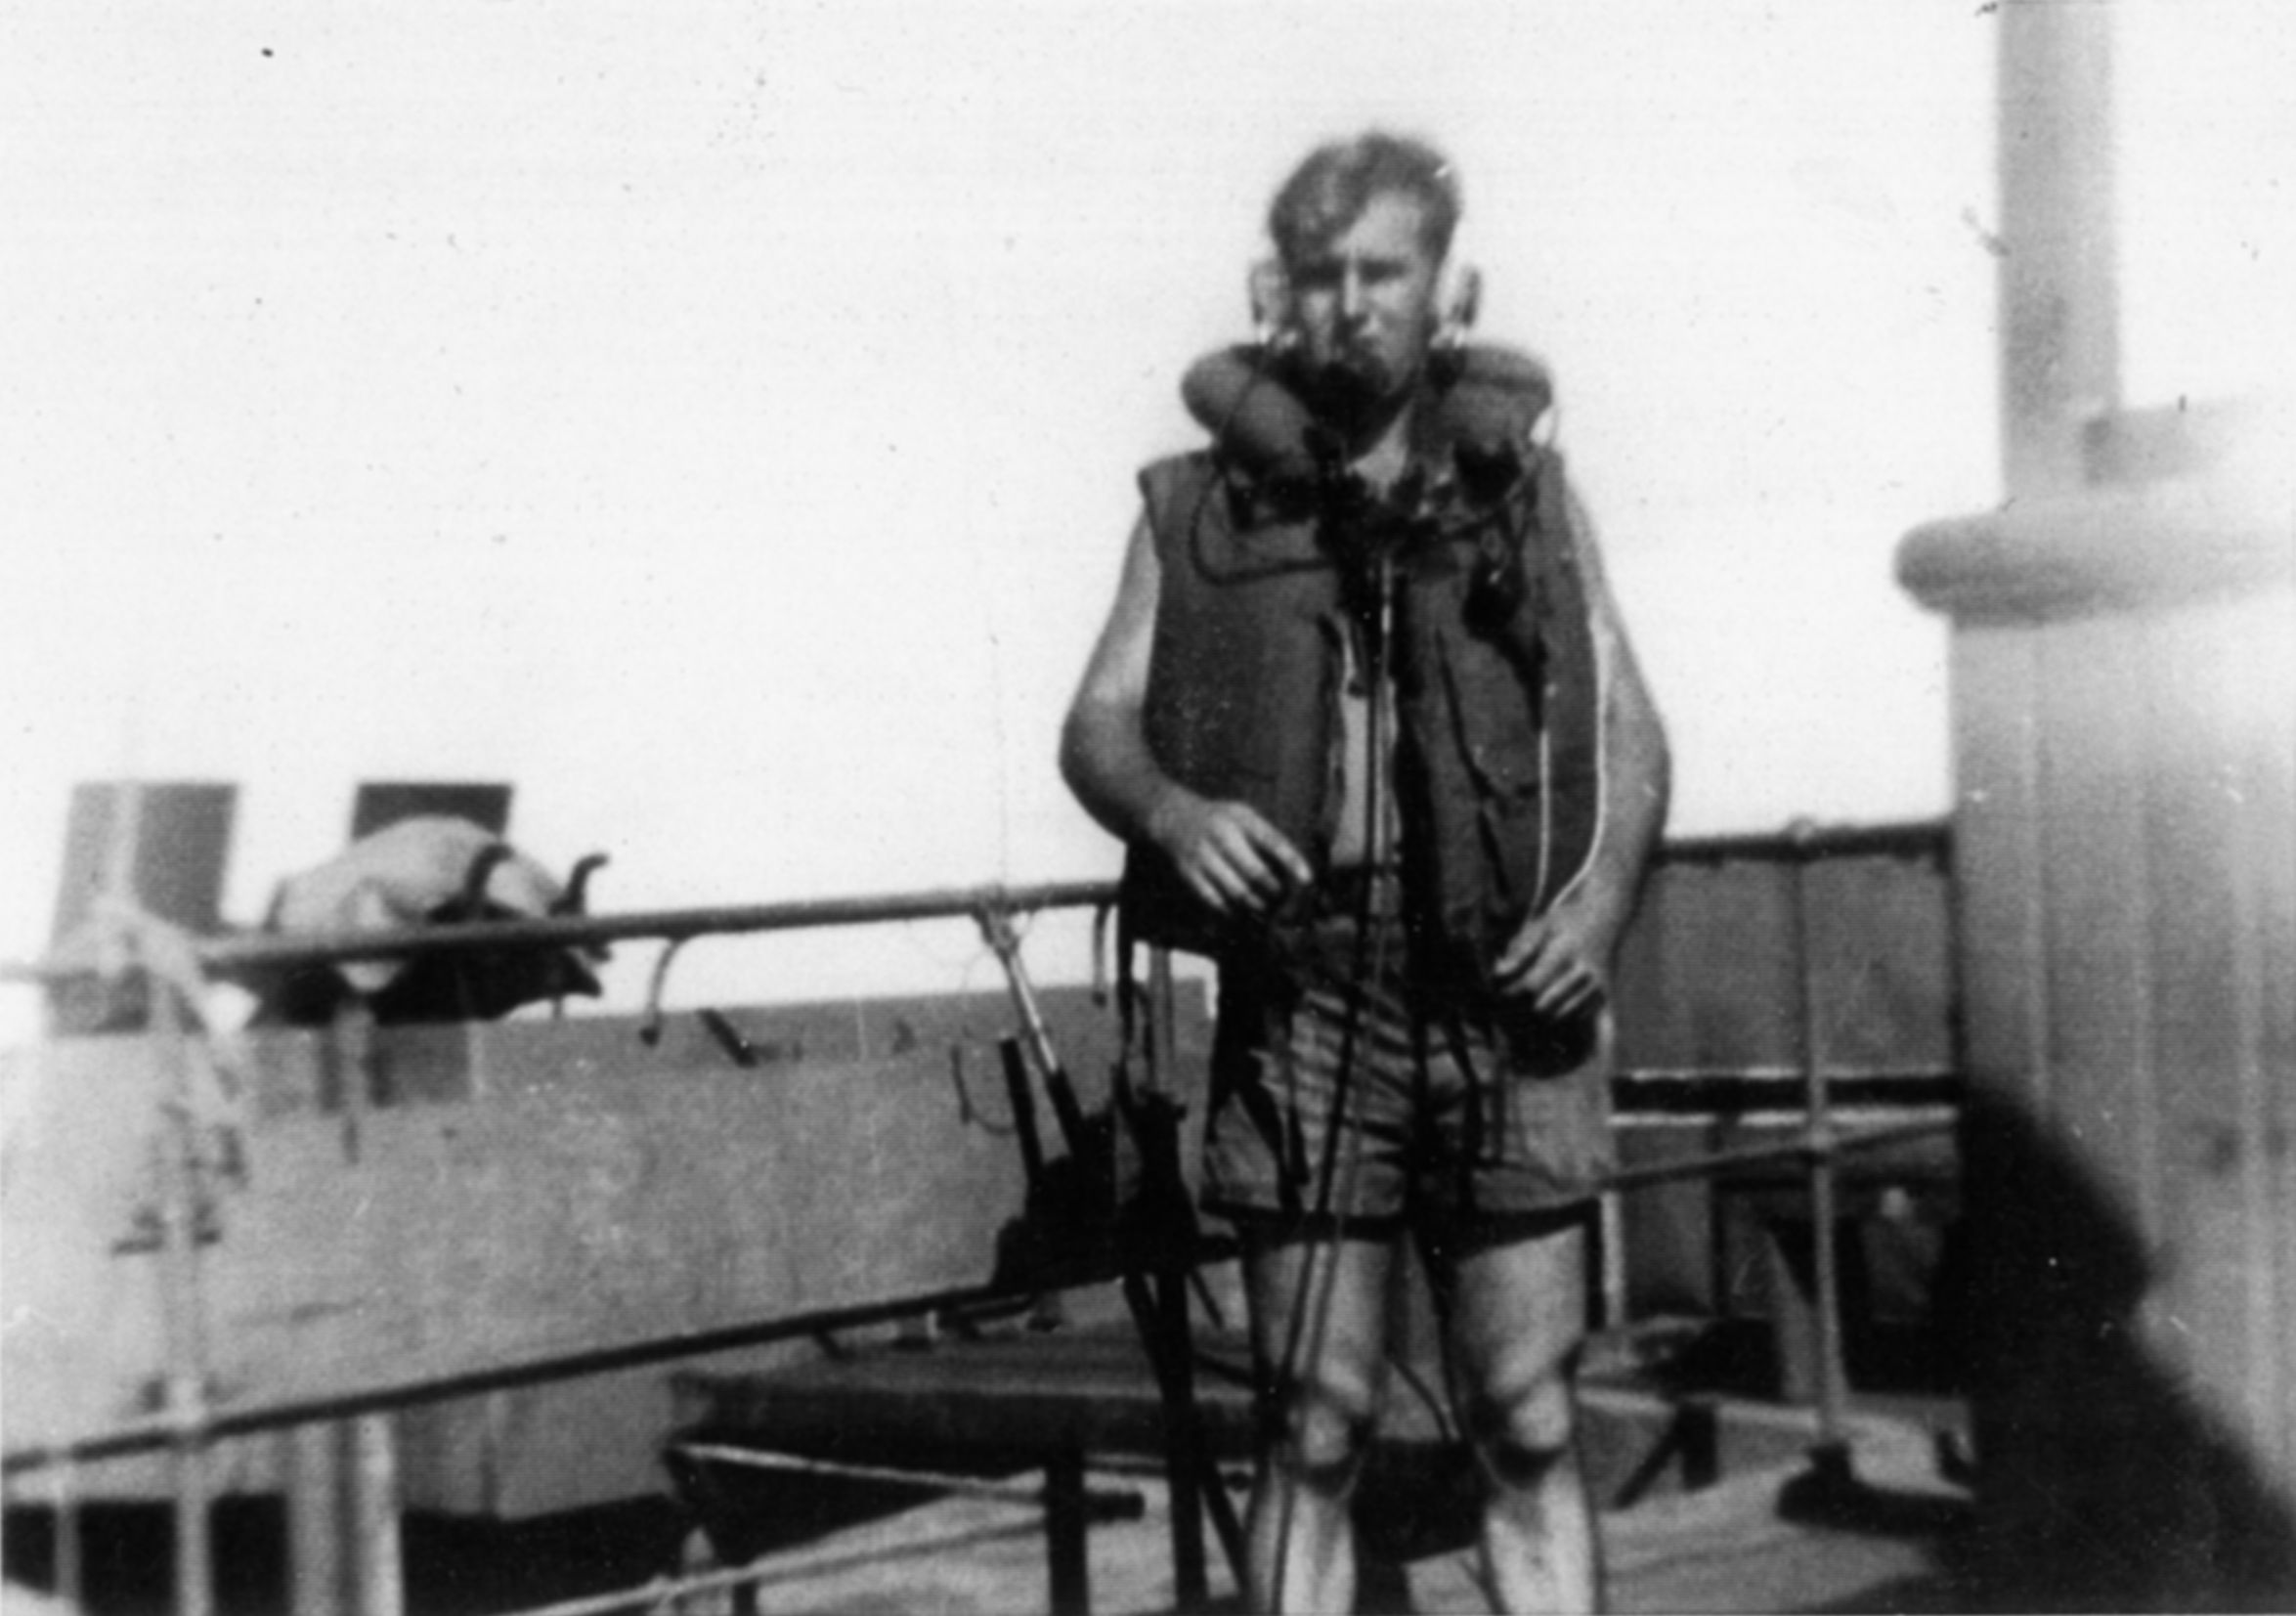 A combat-ready Naval Armed Guardsman is shown wearing his life vest and a radio headset used for communication between gun stations aboard his ship.